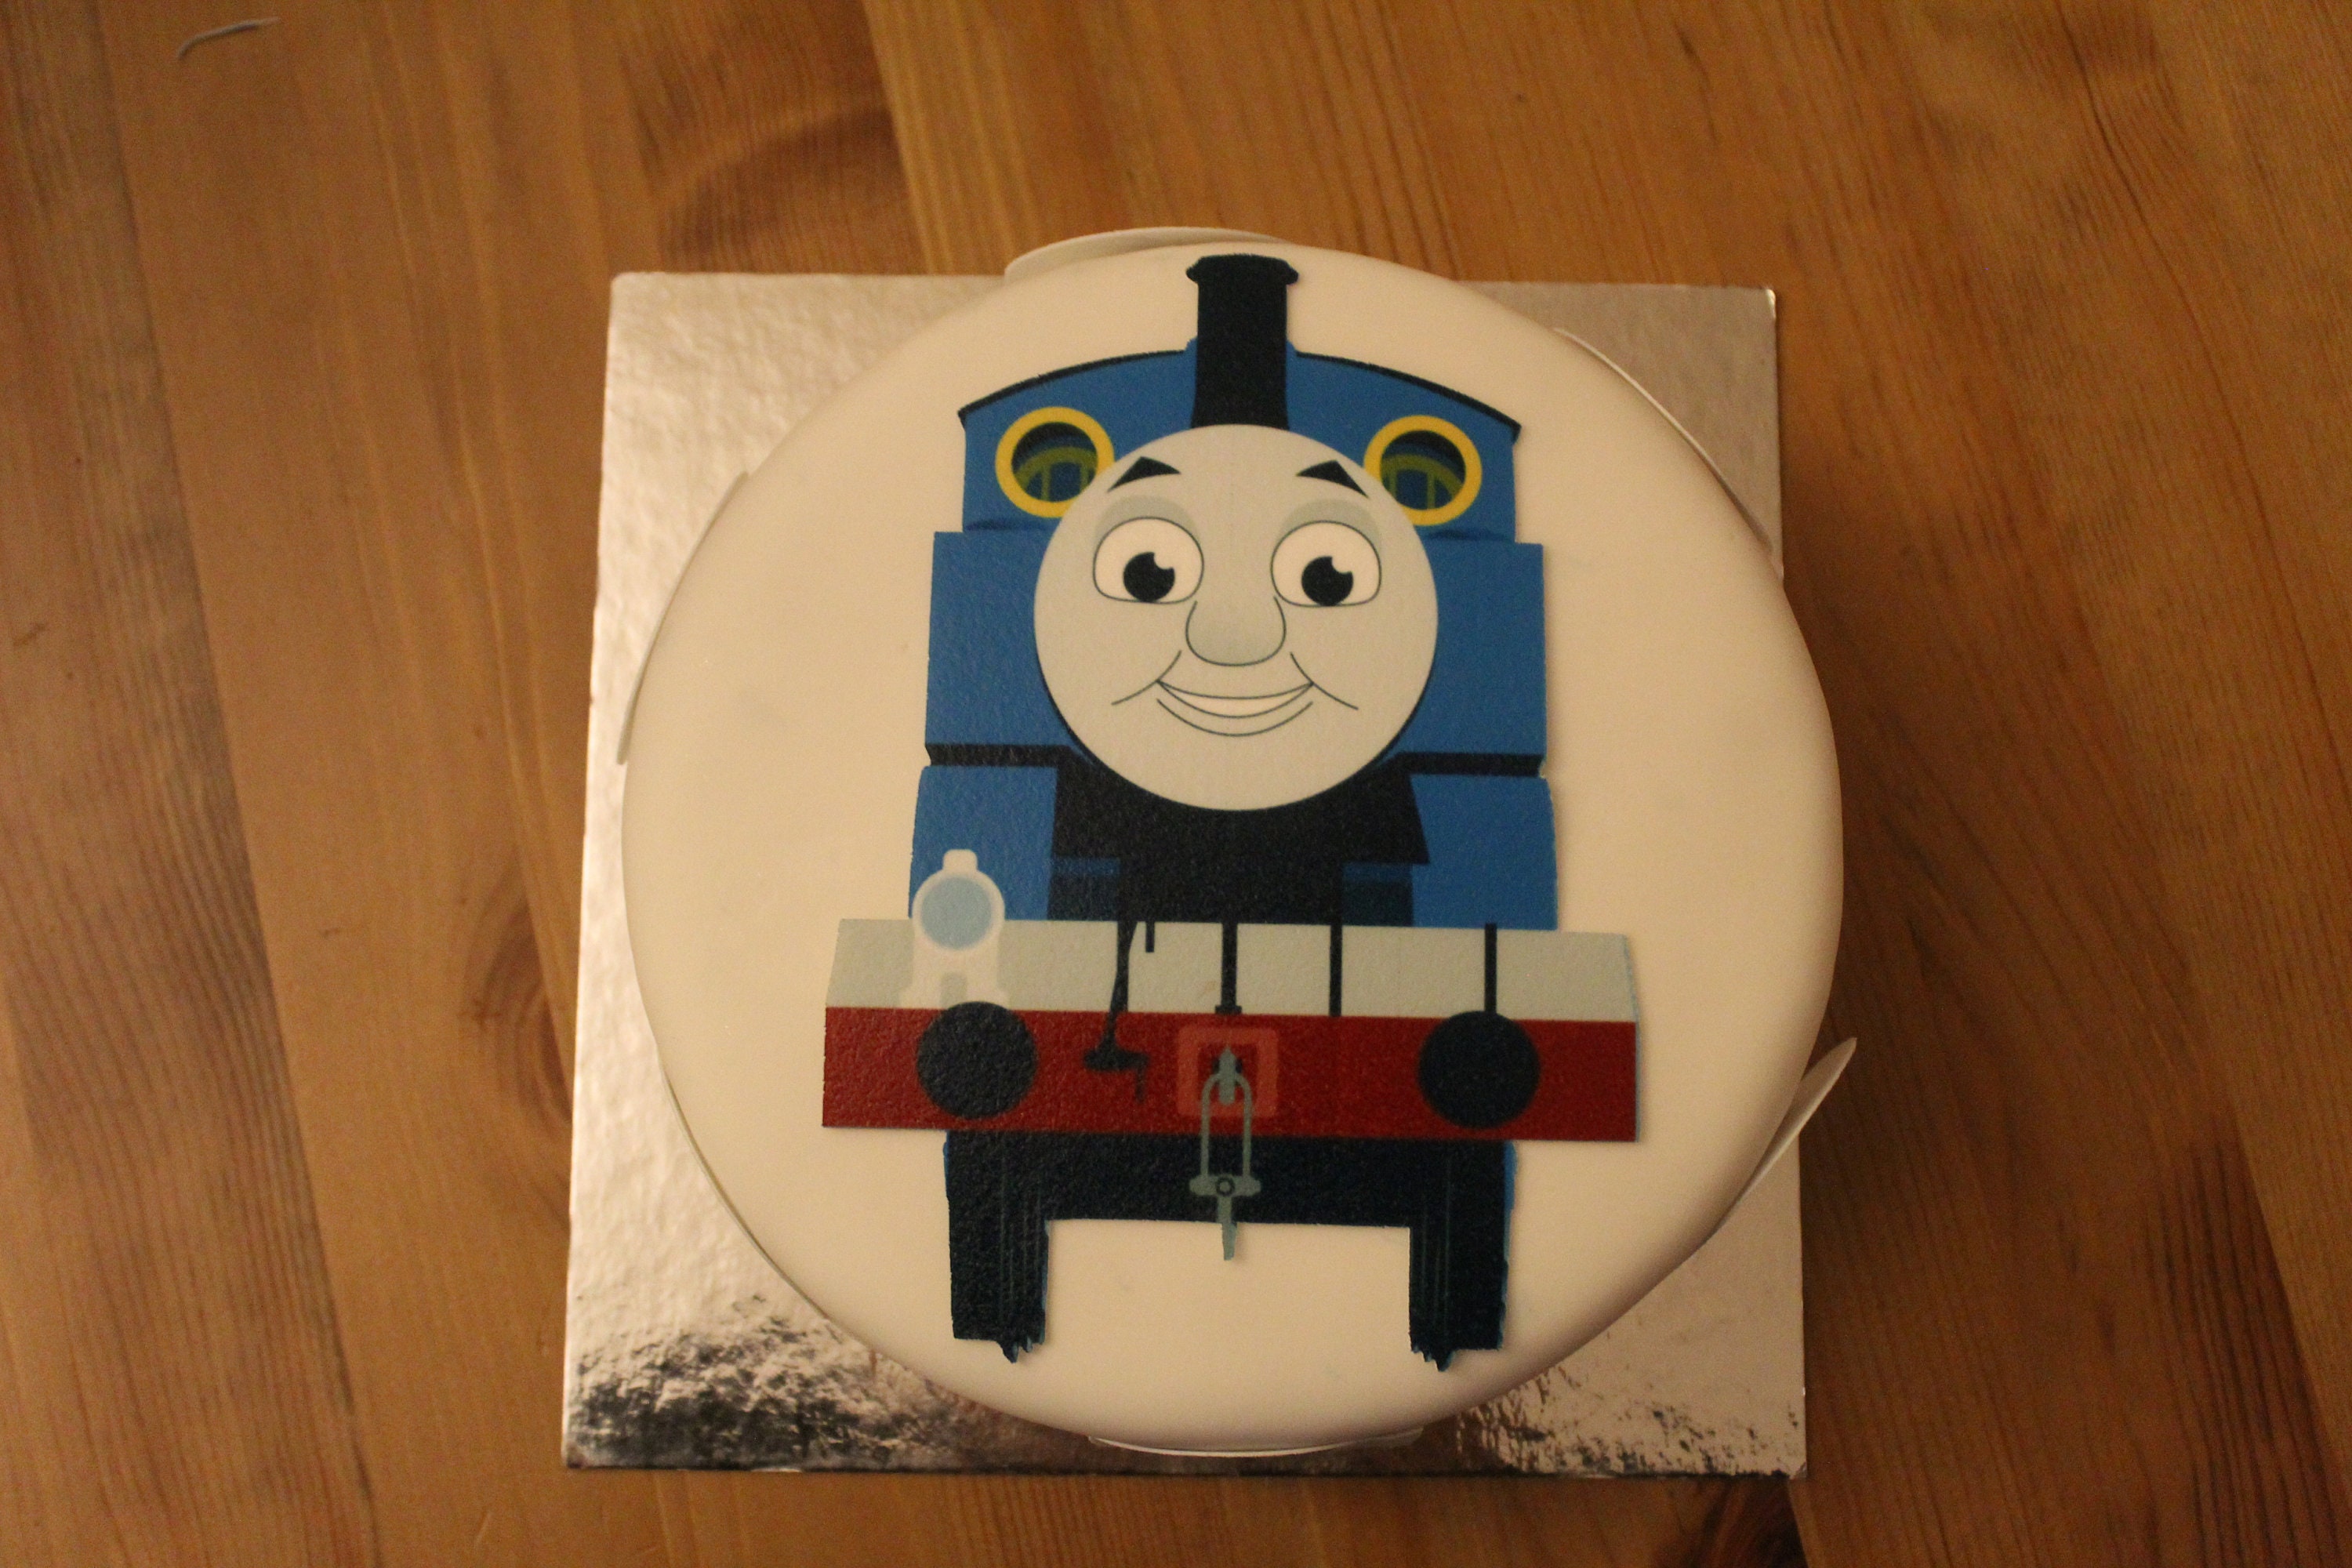 15 x 2" Thomas the Tank Engine PRE CUT ICING Cup Cake Toppers Decorations 